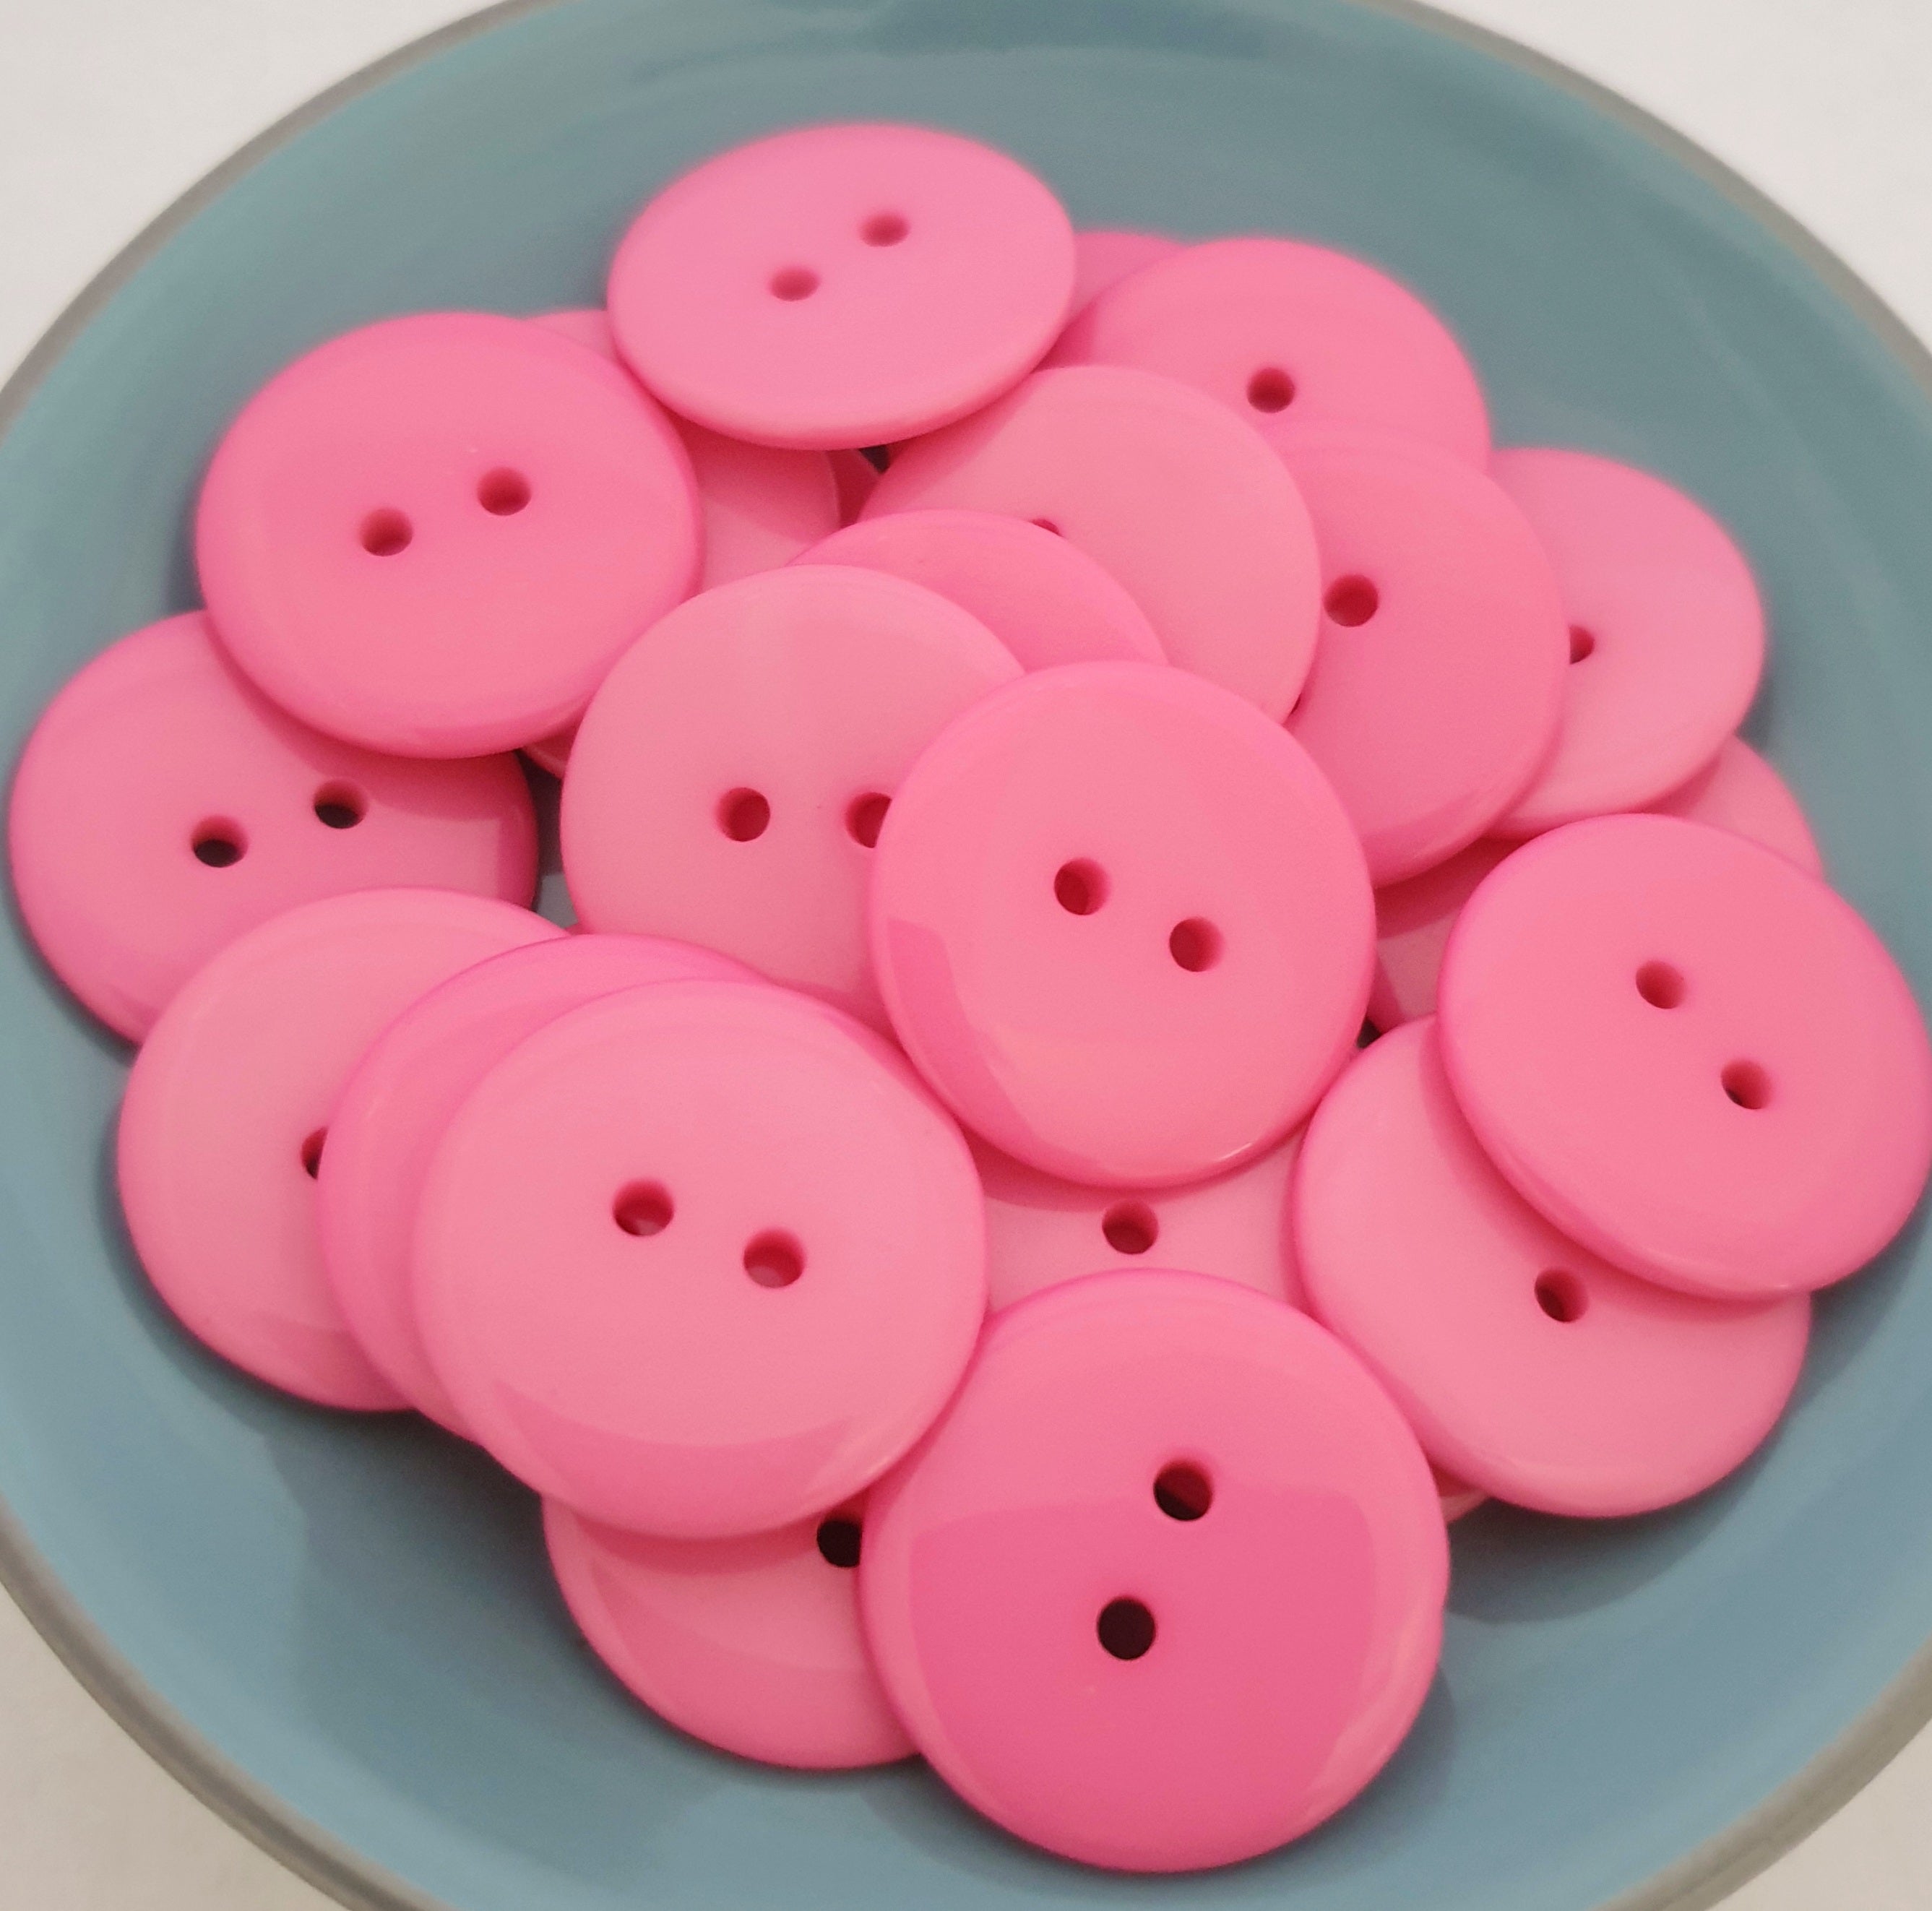 MajorCrafts 36pcs 23mm Bright Pink 2 Holes Round Large Resin Sewing Buttons